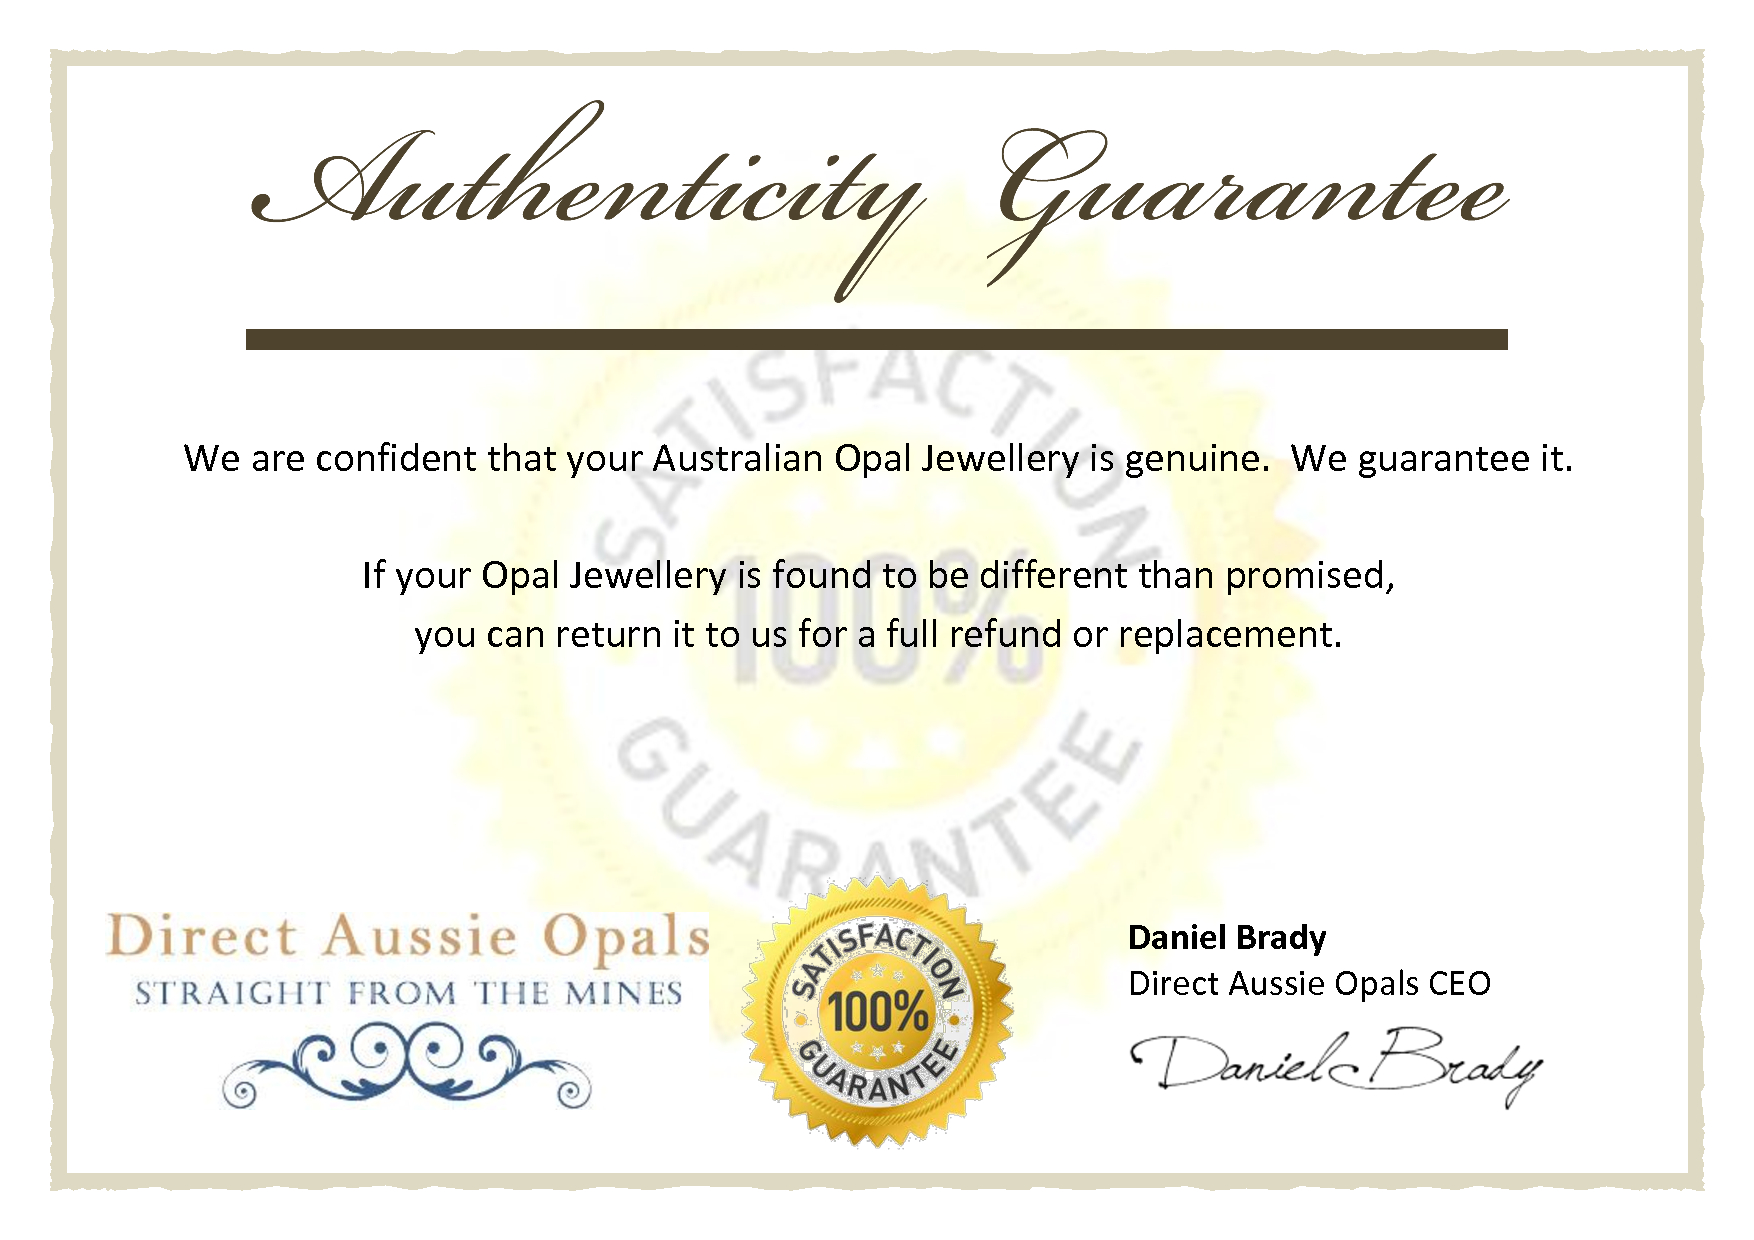 007 Certificate Of Authenticity Template Free Aplg Regarding Certificate Of Authenticity Template